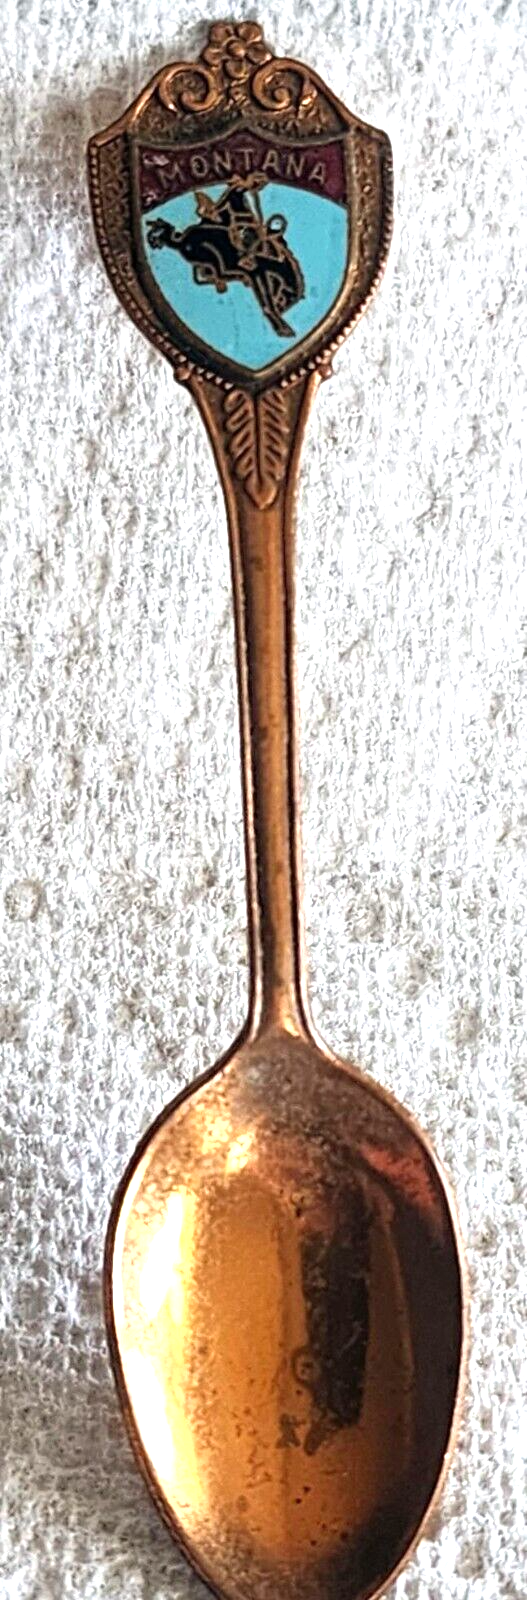 Primary image for Vintage Copper Montana State Souvenir Spoon